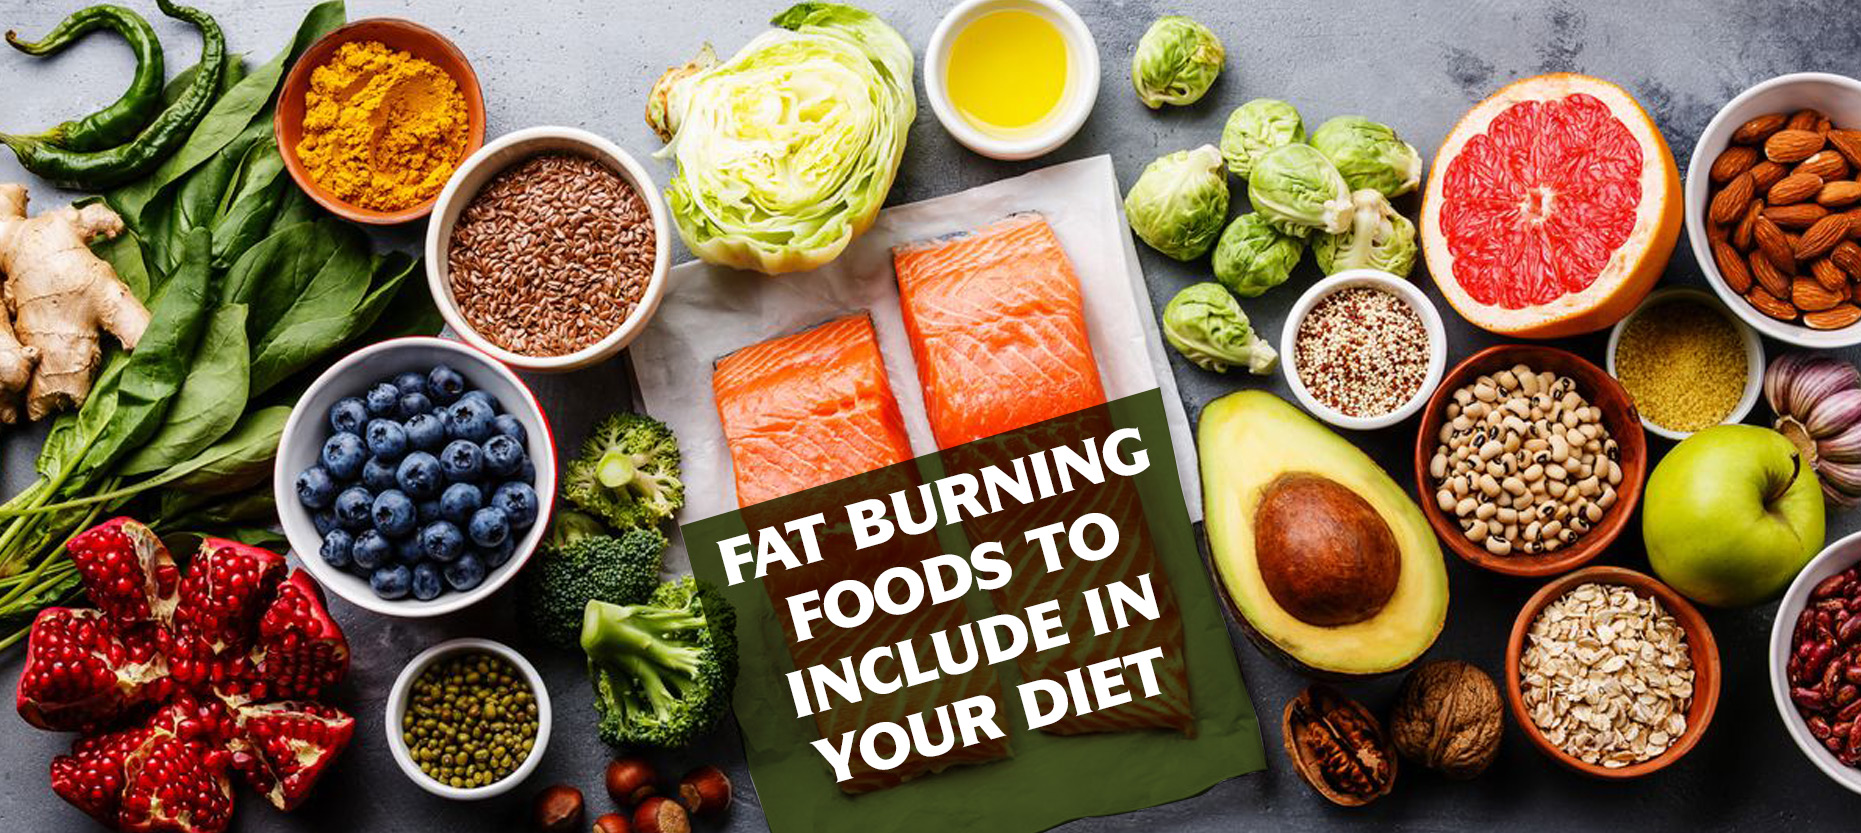 Fat Burning Foods To Include In Your Diet |